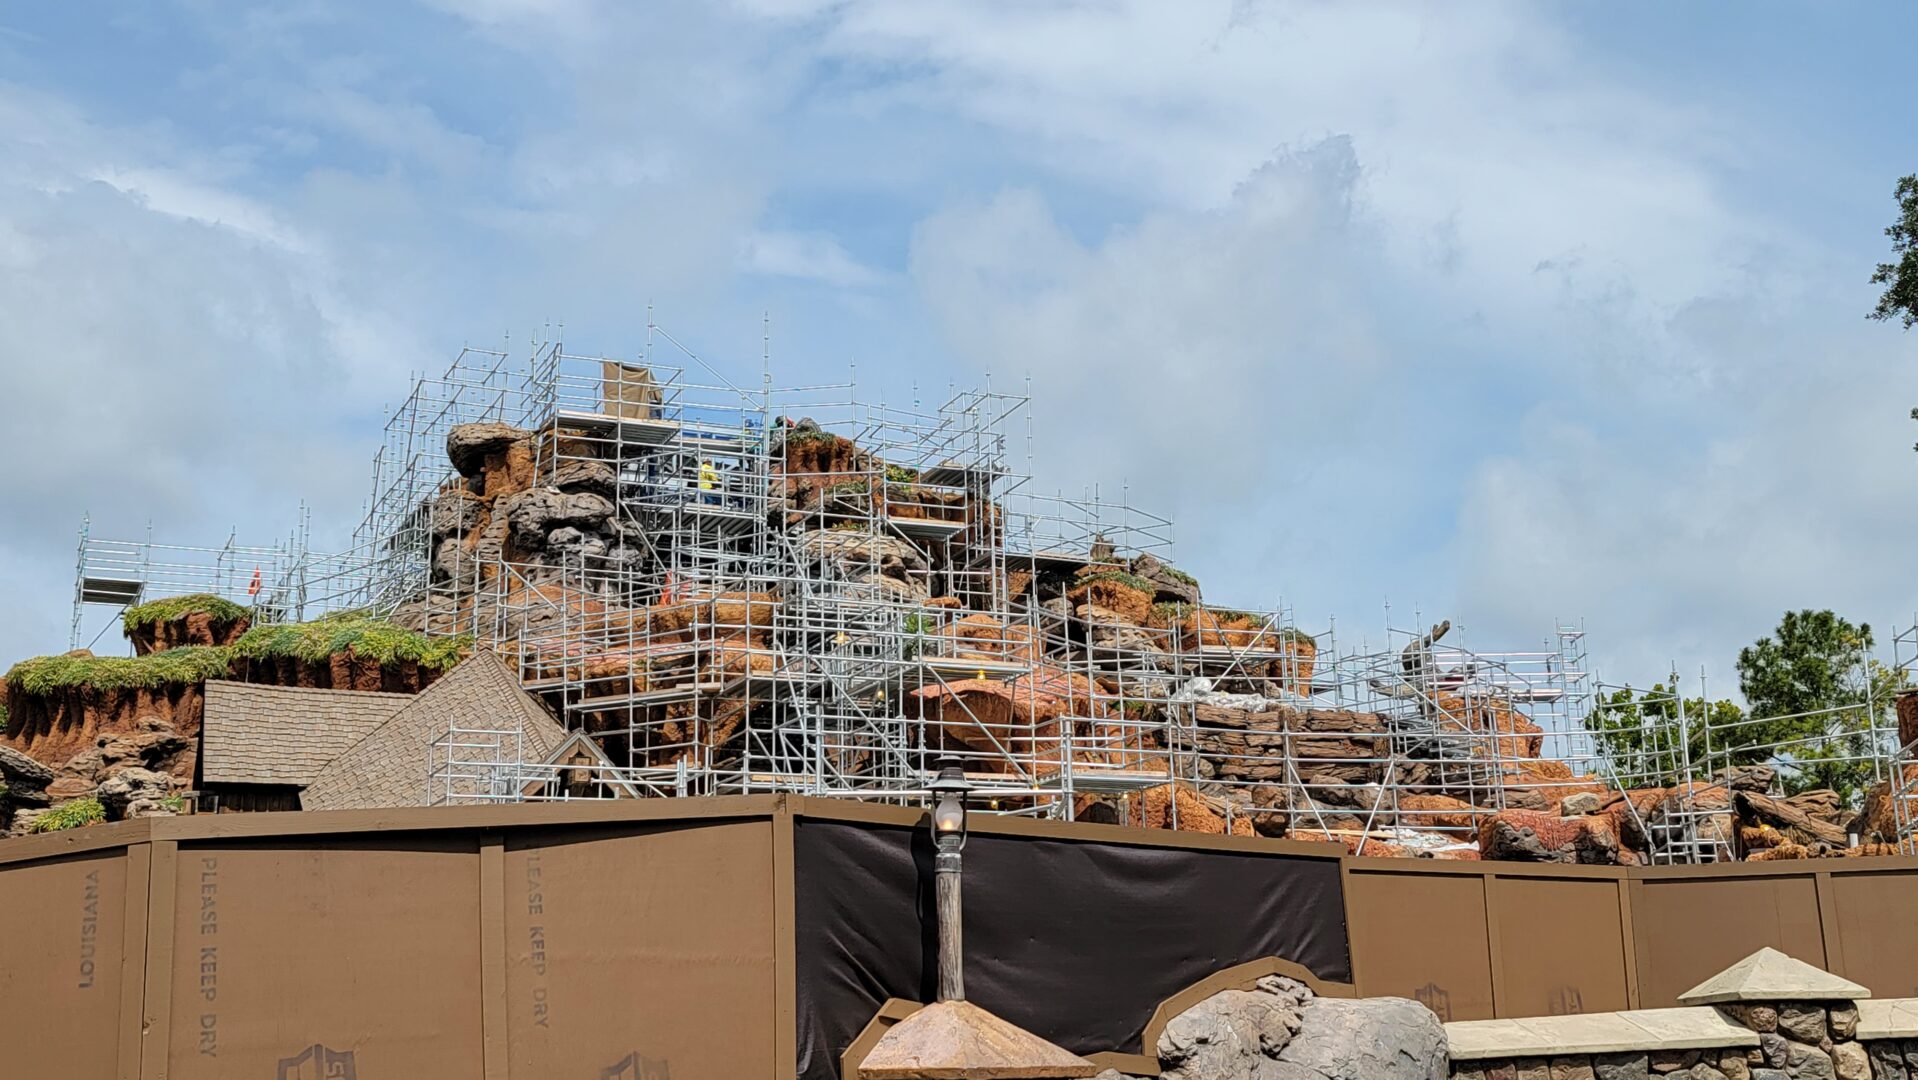 Southern Dome Salt Co Transformation Continues on Tiana’s Bayou Adventure in the Magic Kingdom